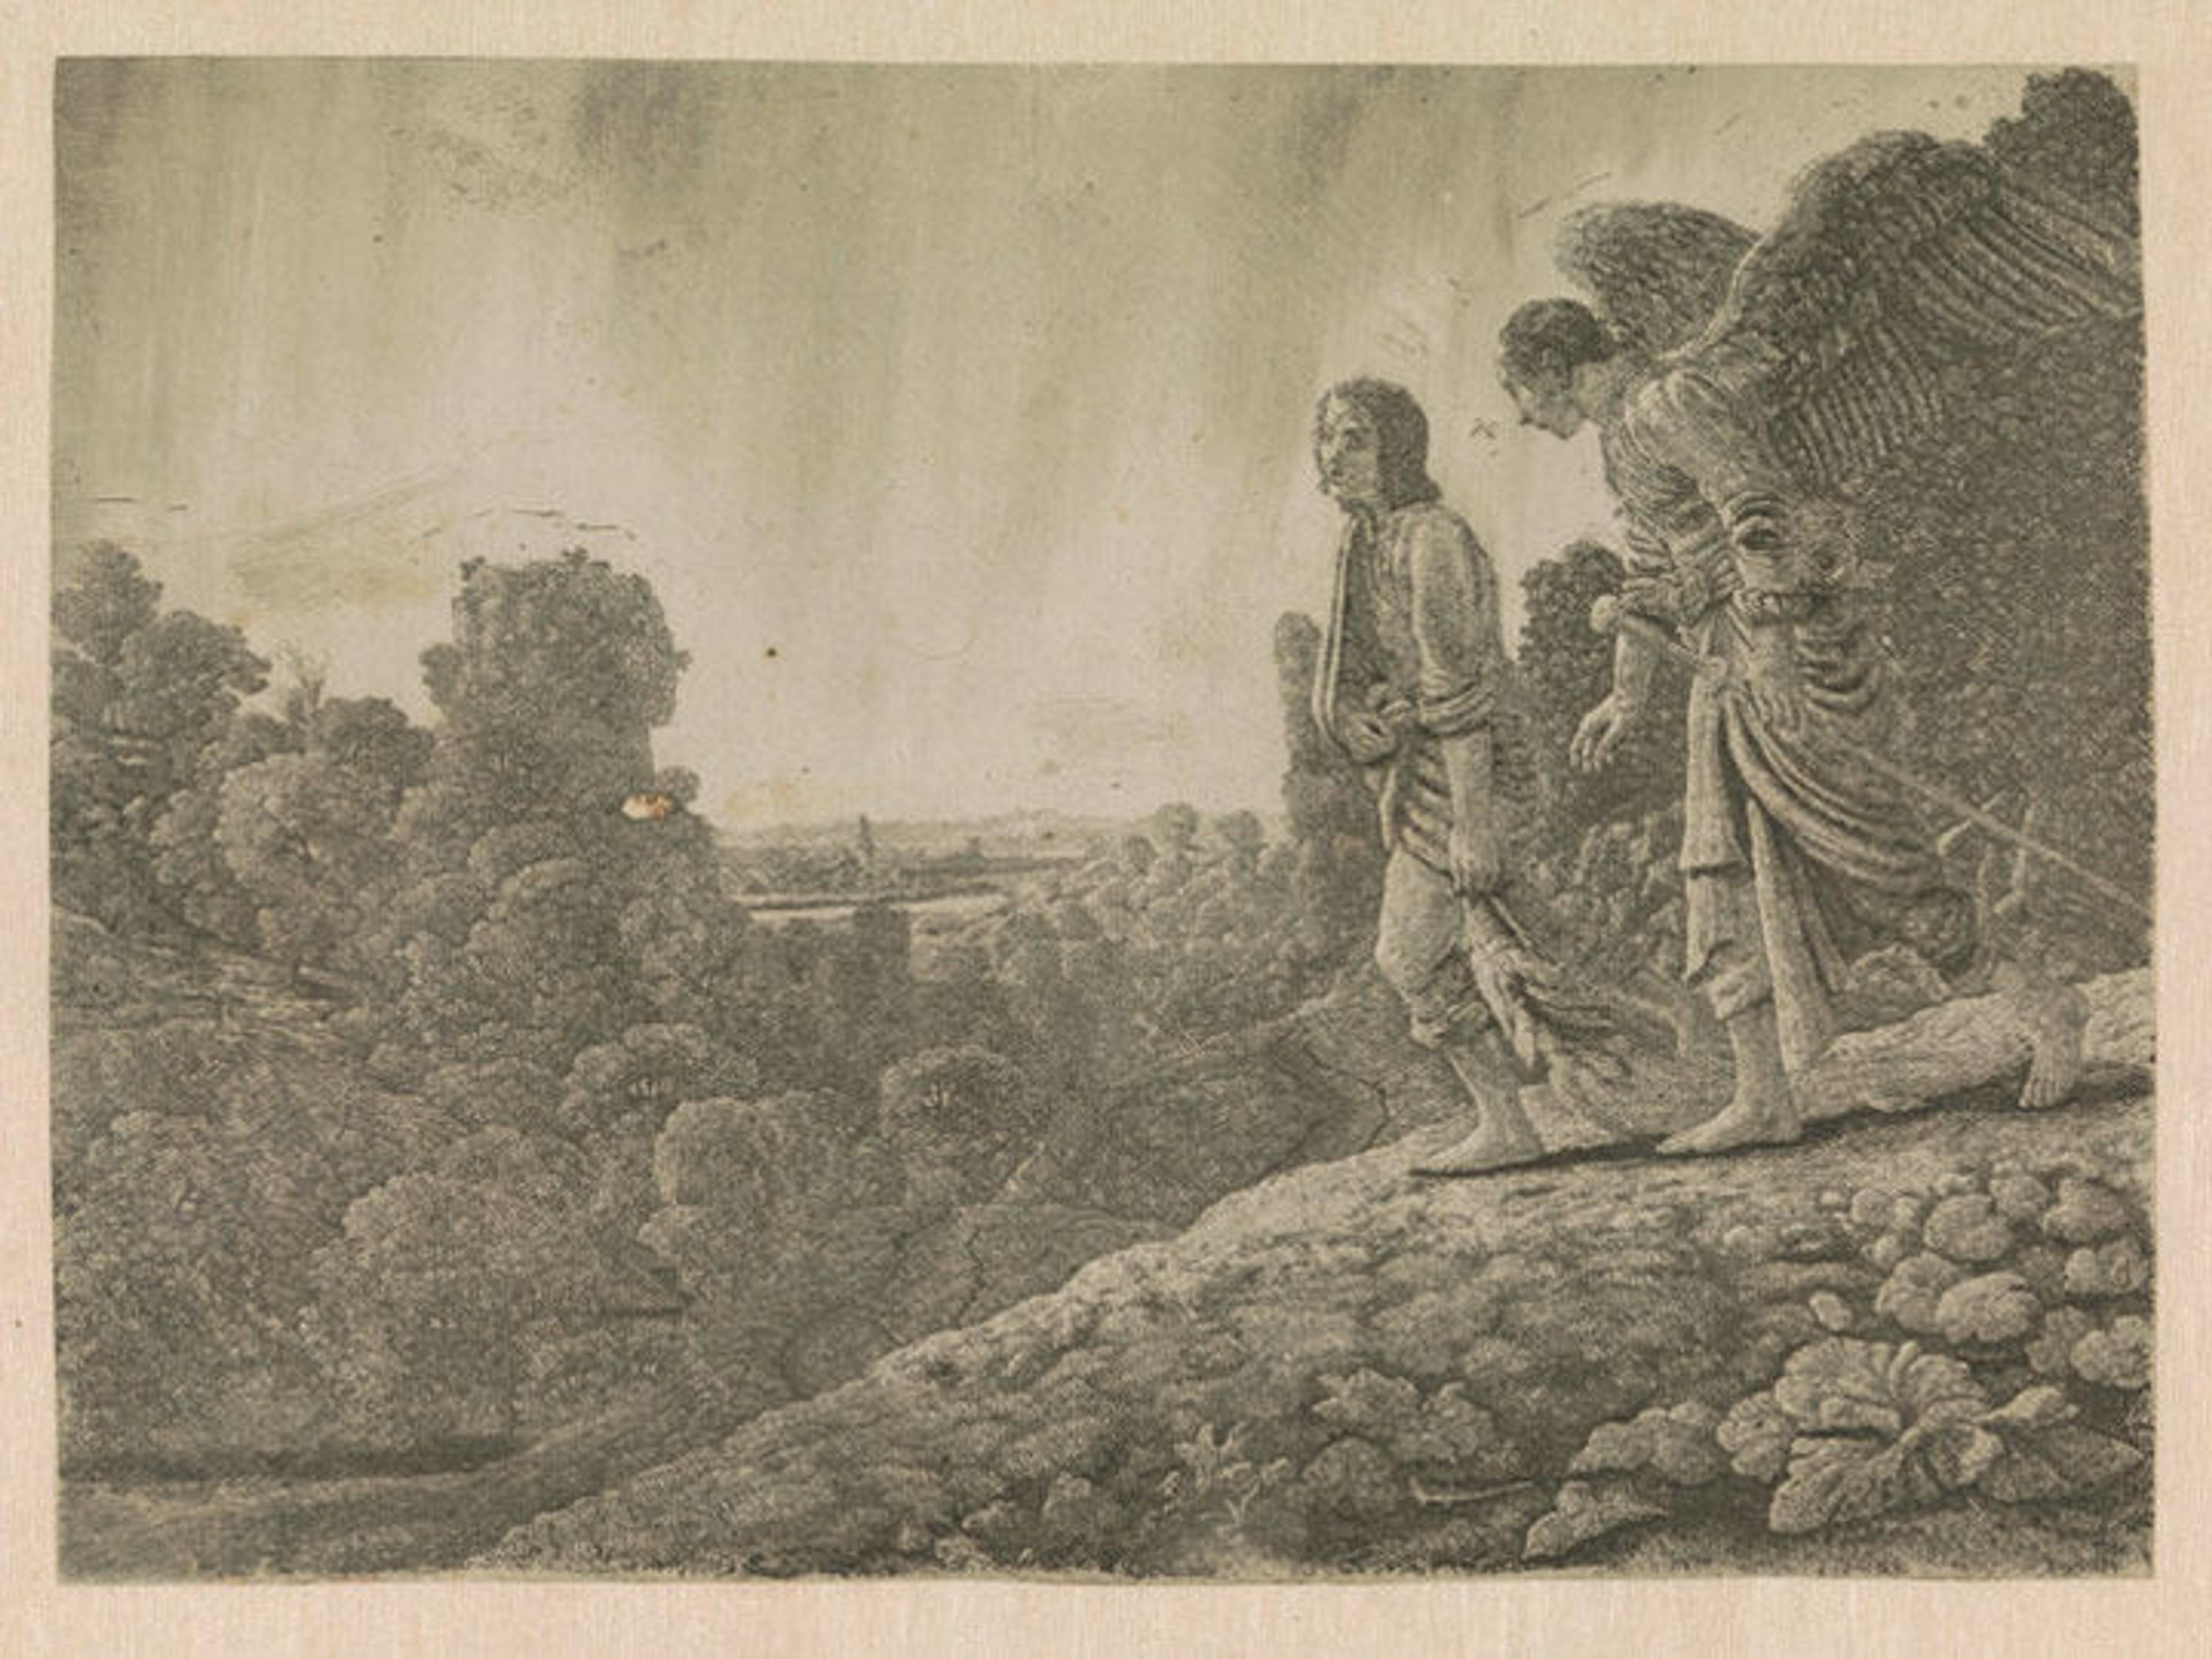 Dutch etching depicting the biblical figure Tobias walking with an angel across a vast landscape